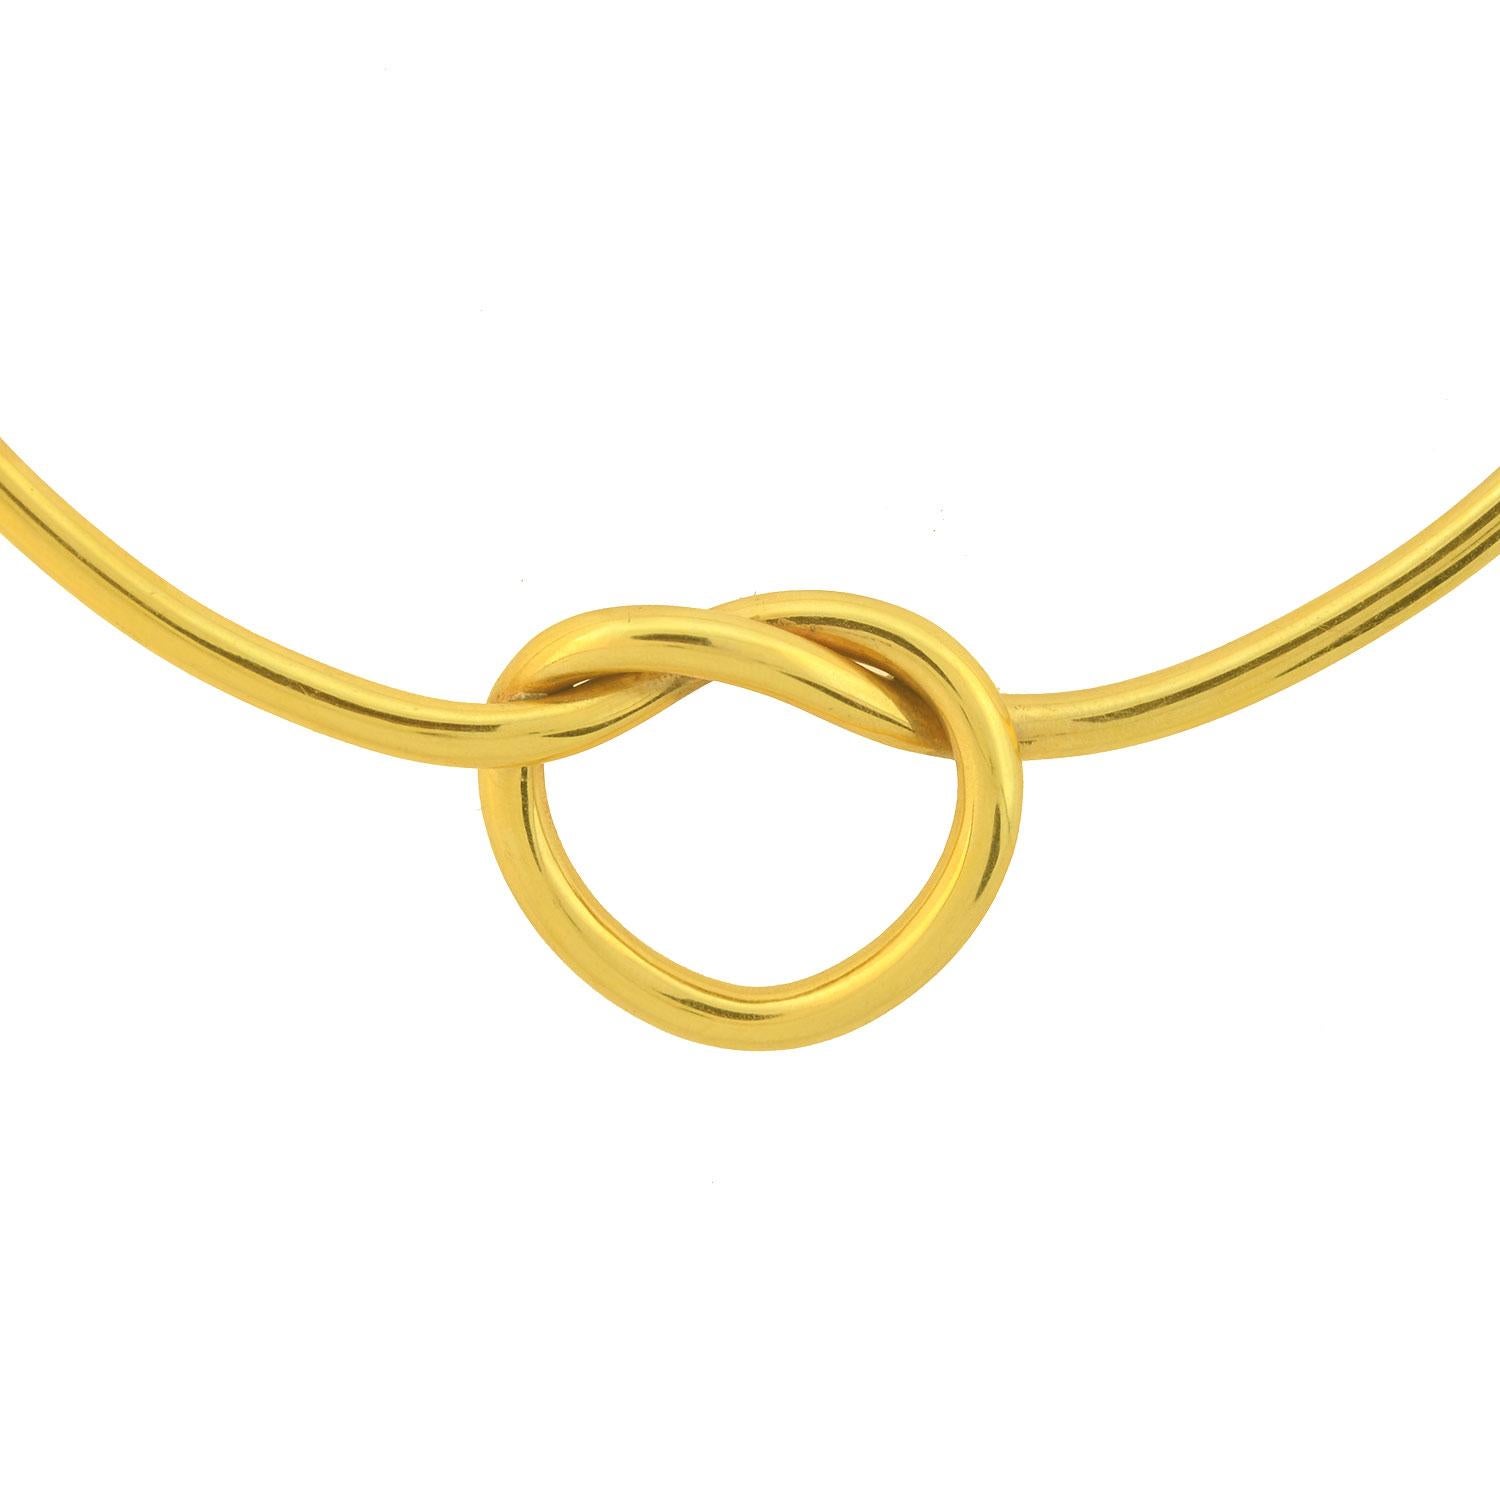 A stunning Vintage necklace from the 1970s! Crafted in 18kt yellow gold, this gorgeous piece has an inflexible collar design and features a large love knot at its center. The polished yellow gold necklace is comprised of a thick, single gold tube,